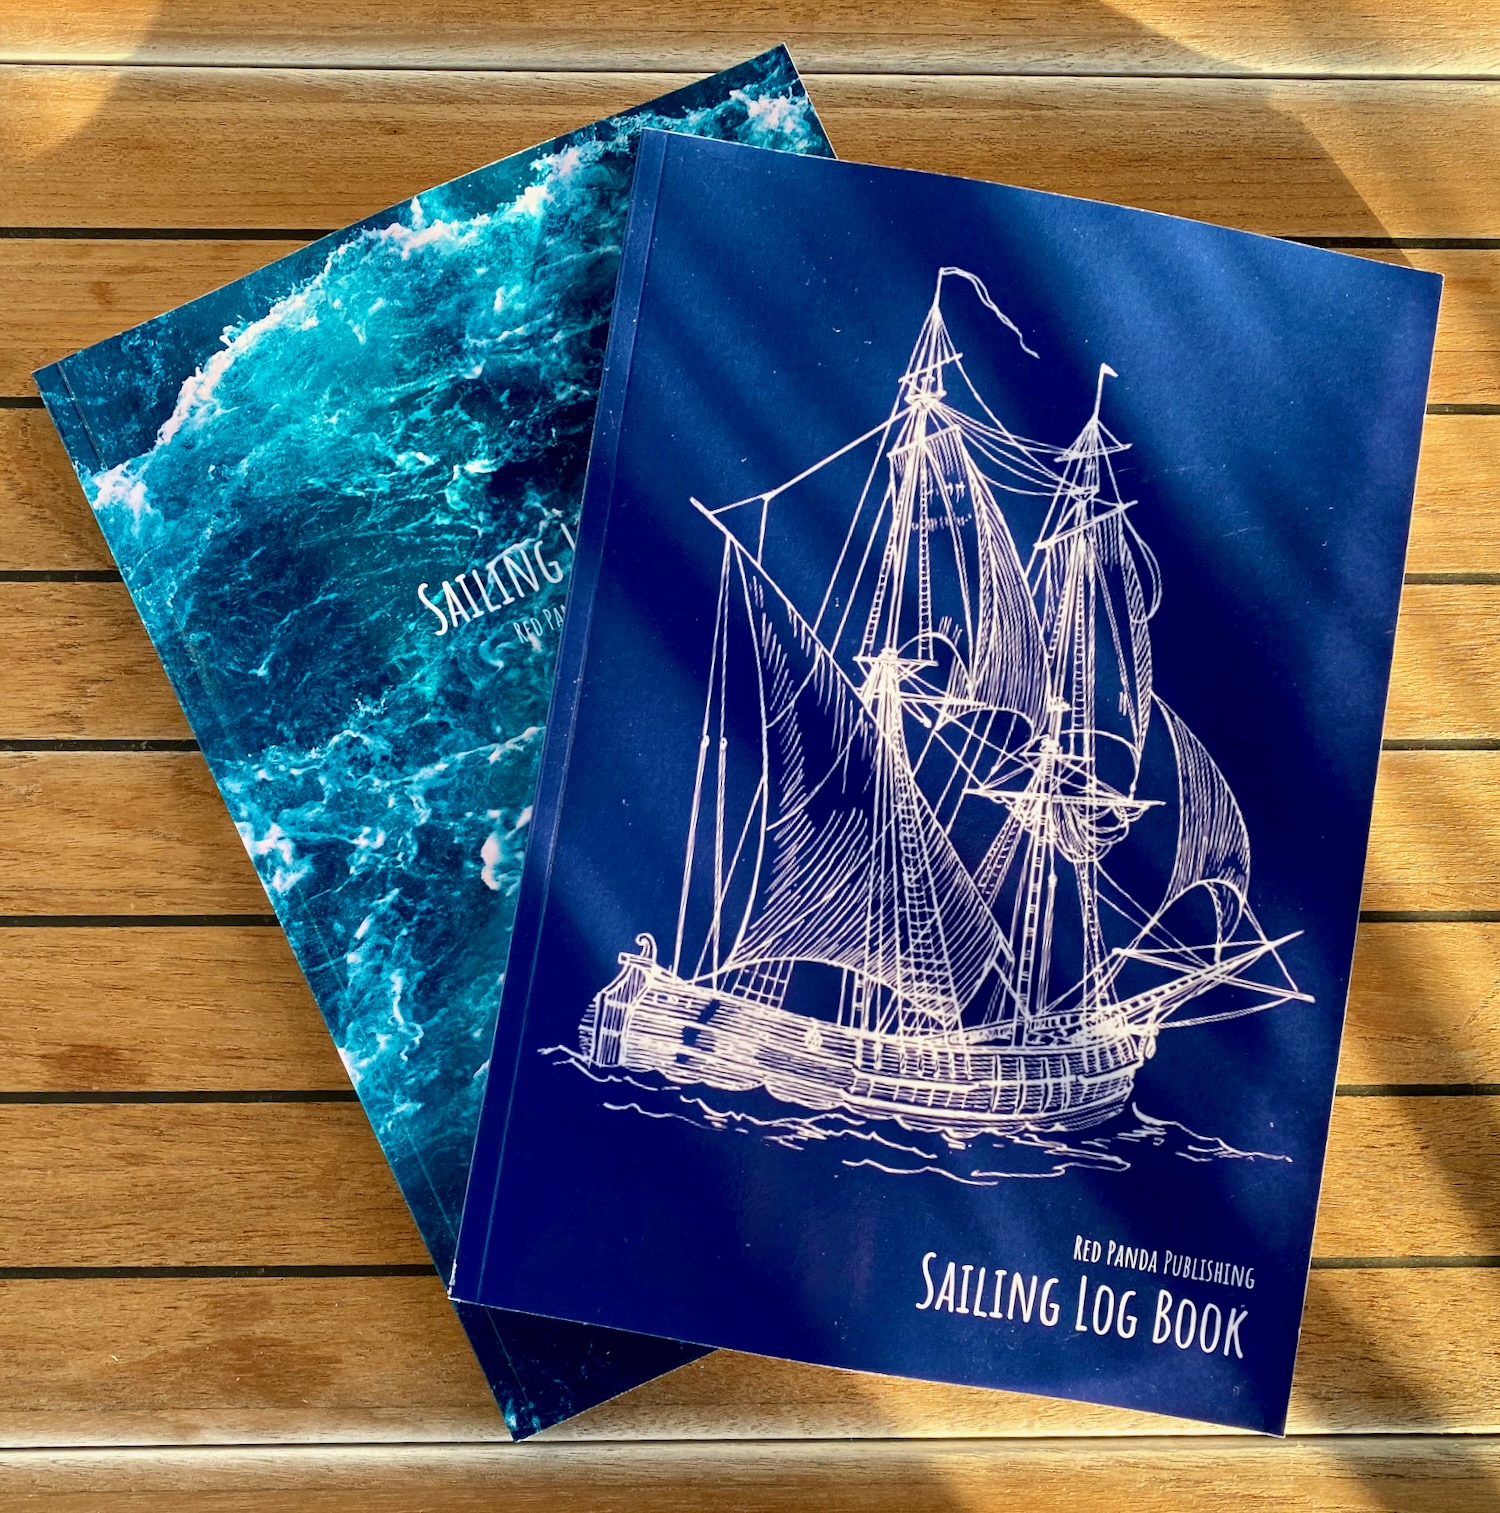 Two of the Sailing Log Book covers I published